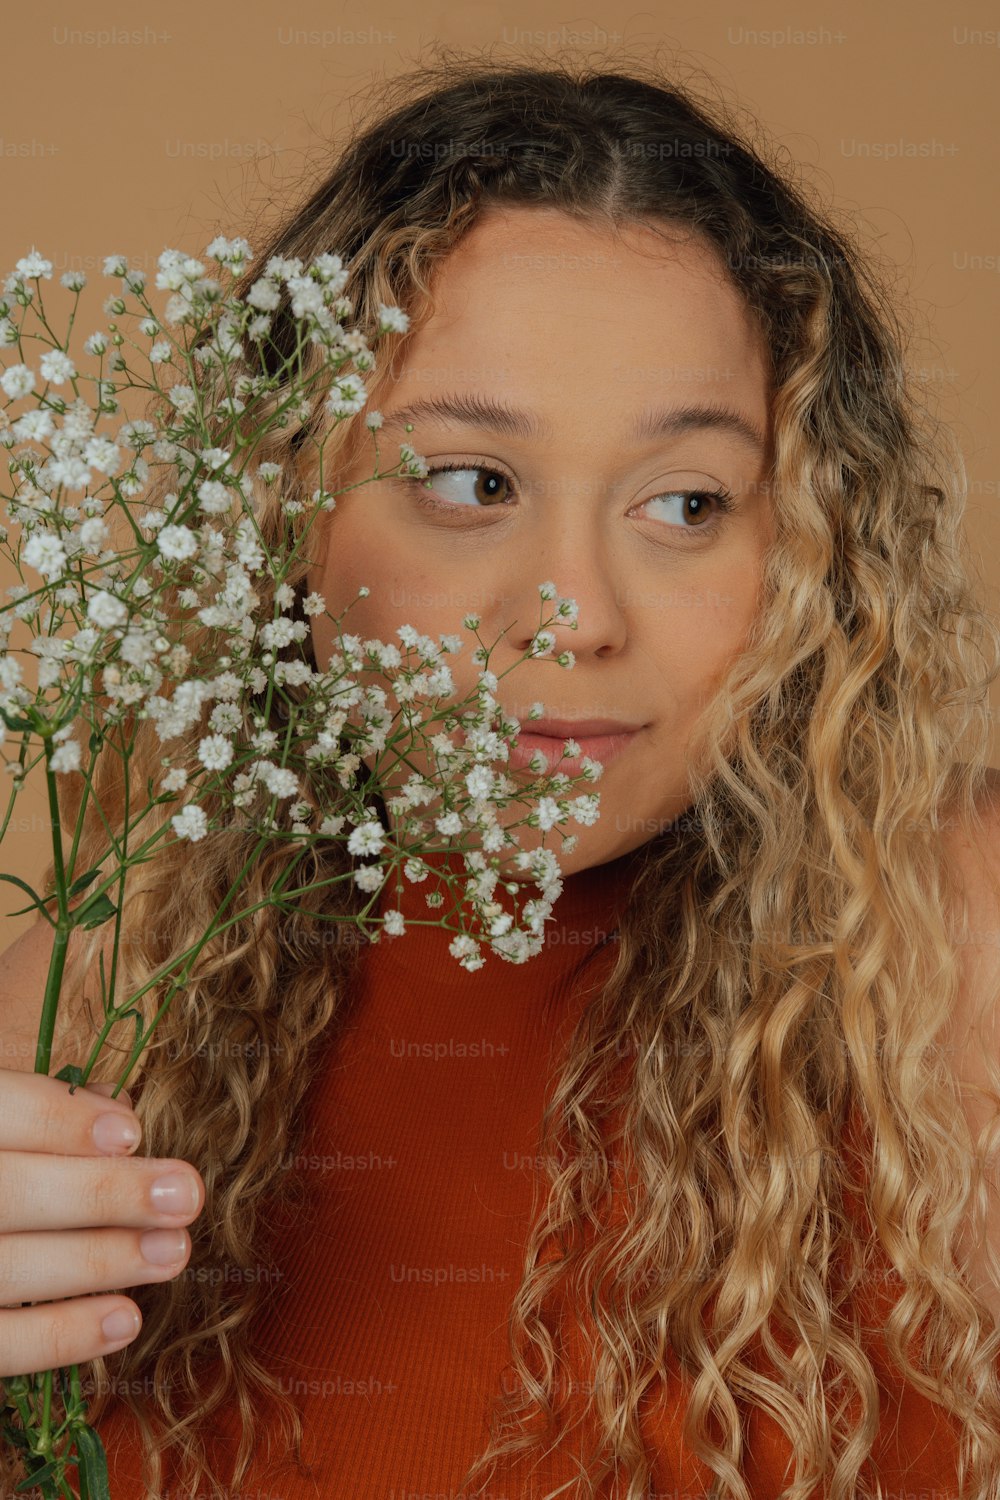 a woman with curly hair holding a bunch of flowers